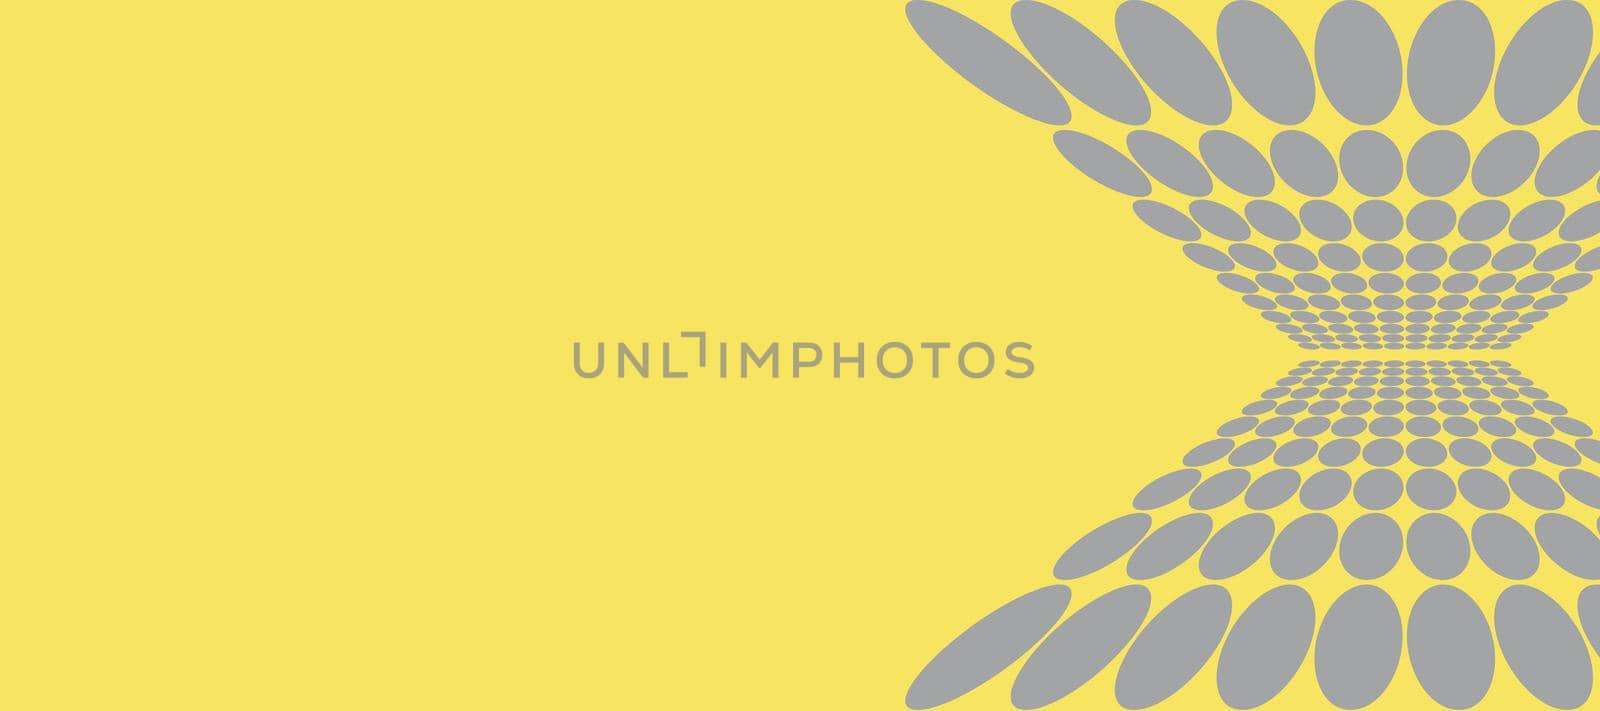 Illustration of abstract gray patterns on a yellow background. High quality photo